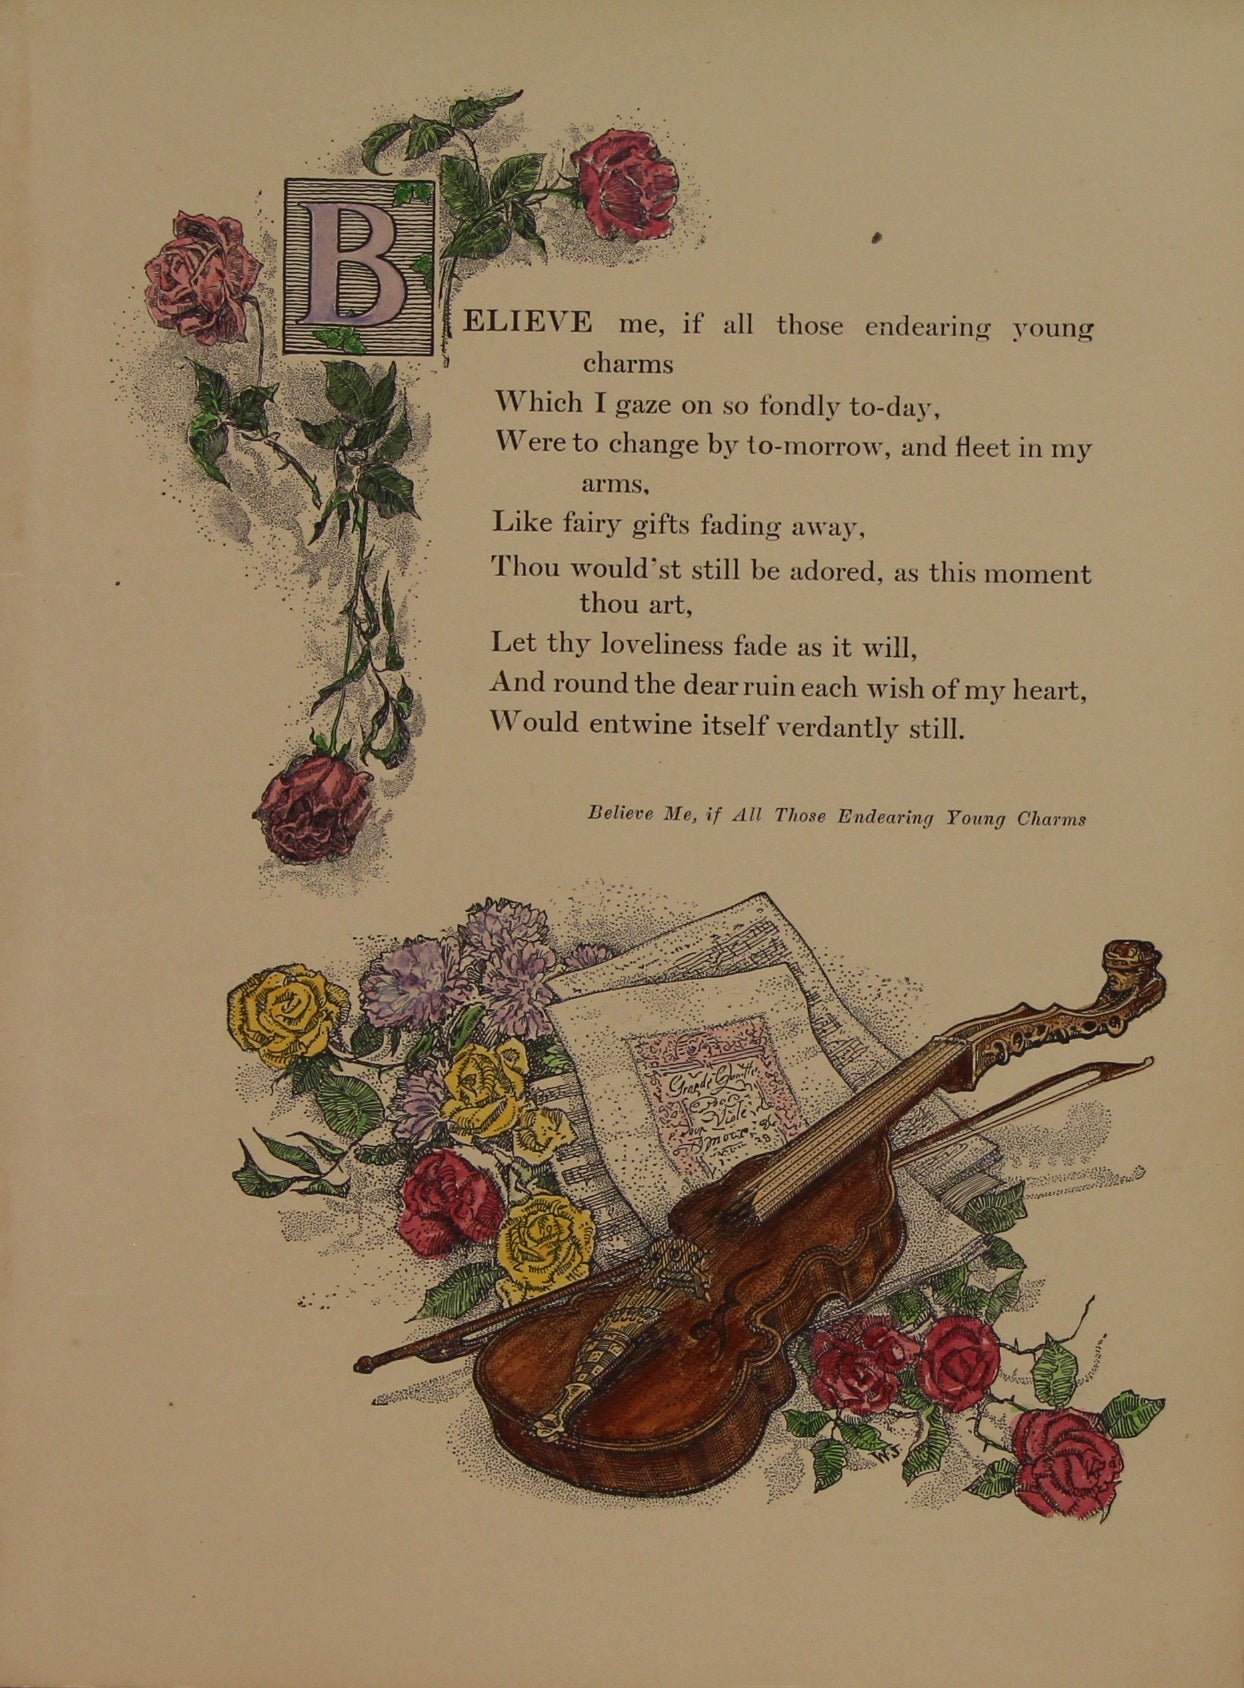 Music, Believe Me, If All Those Endearing Young Charms, Thomas Moore, 1808